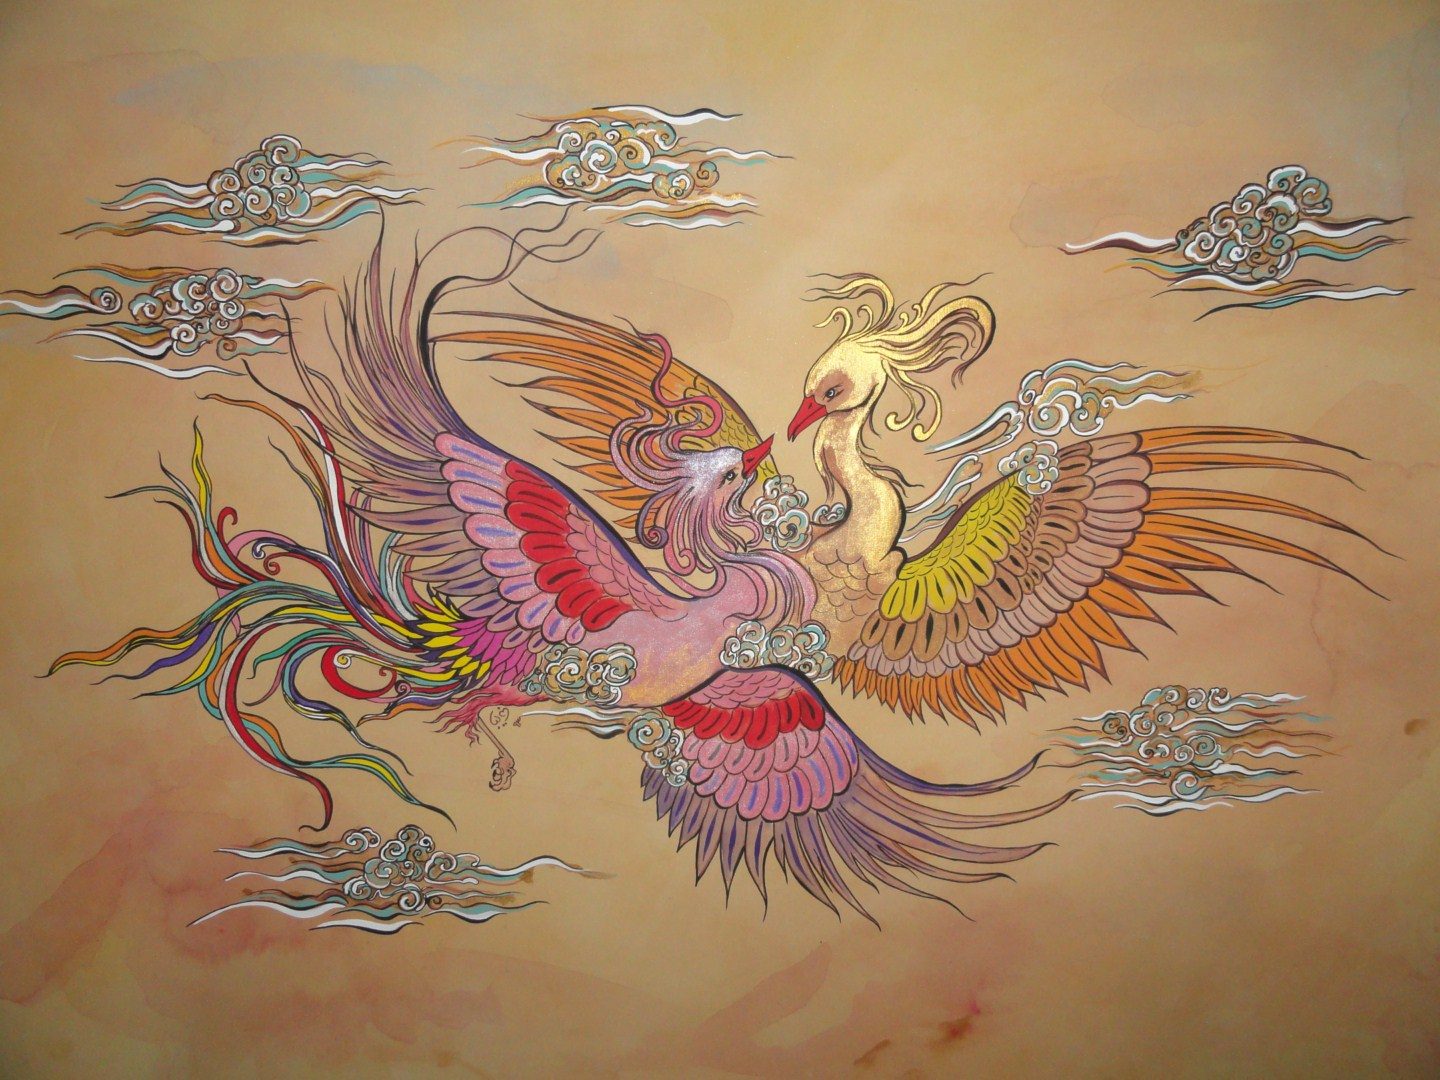 Simorgh | A mythical bird from the ancient